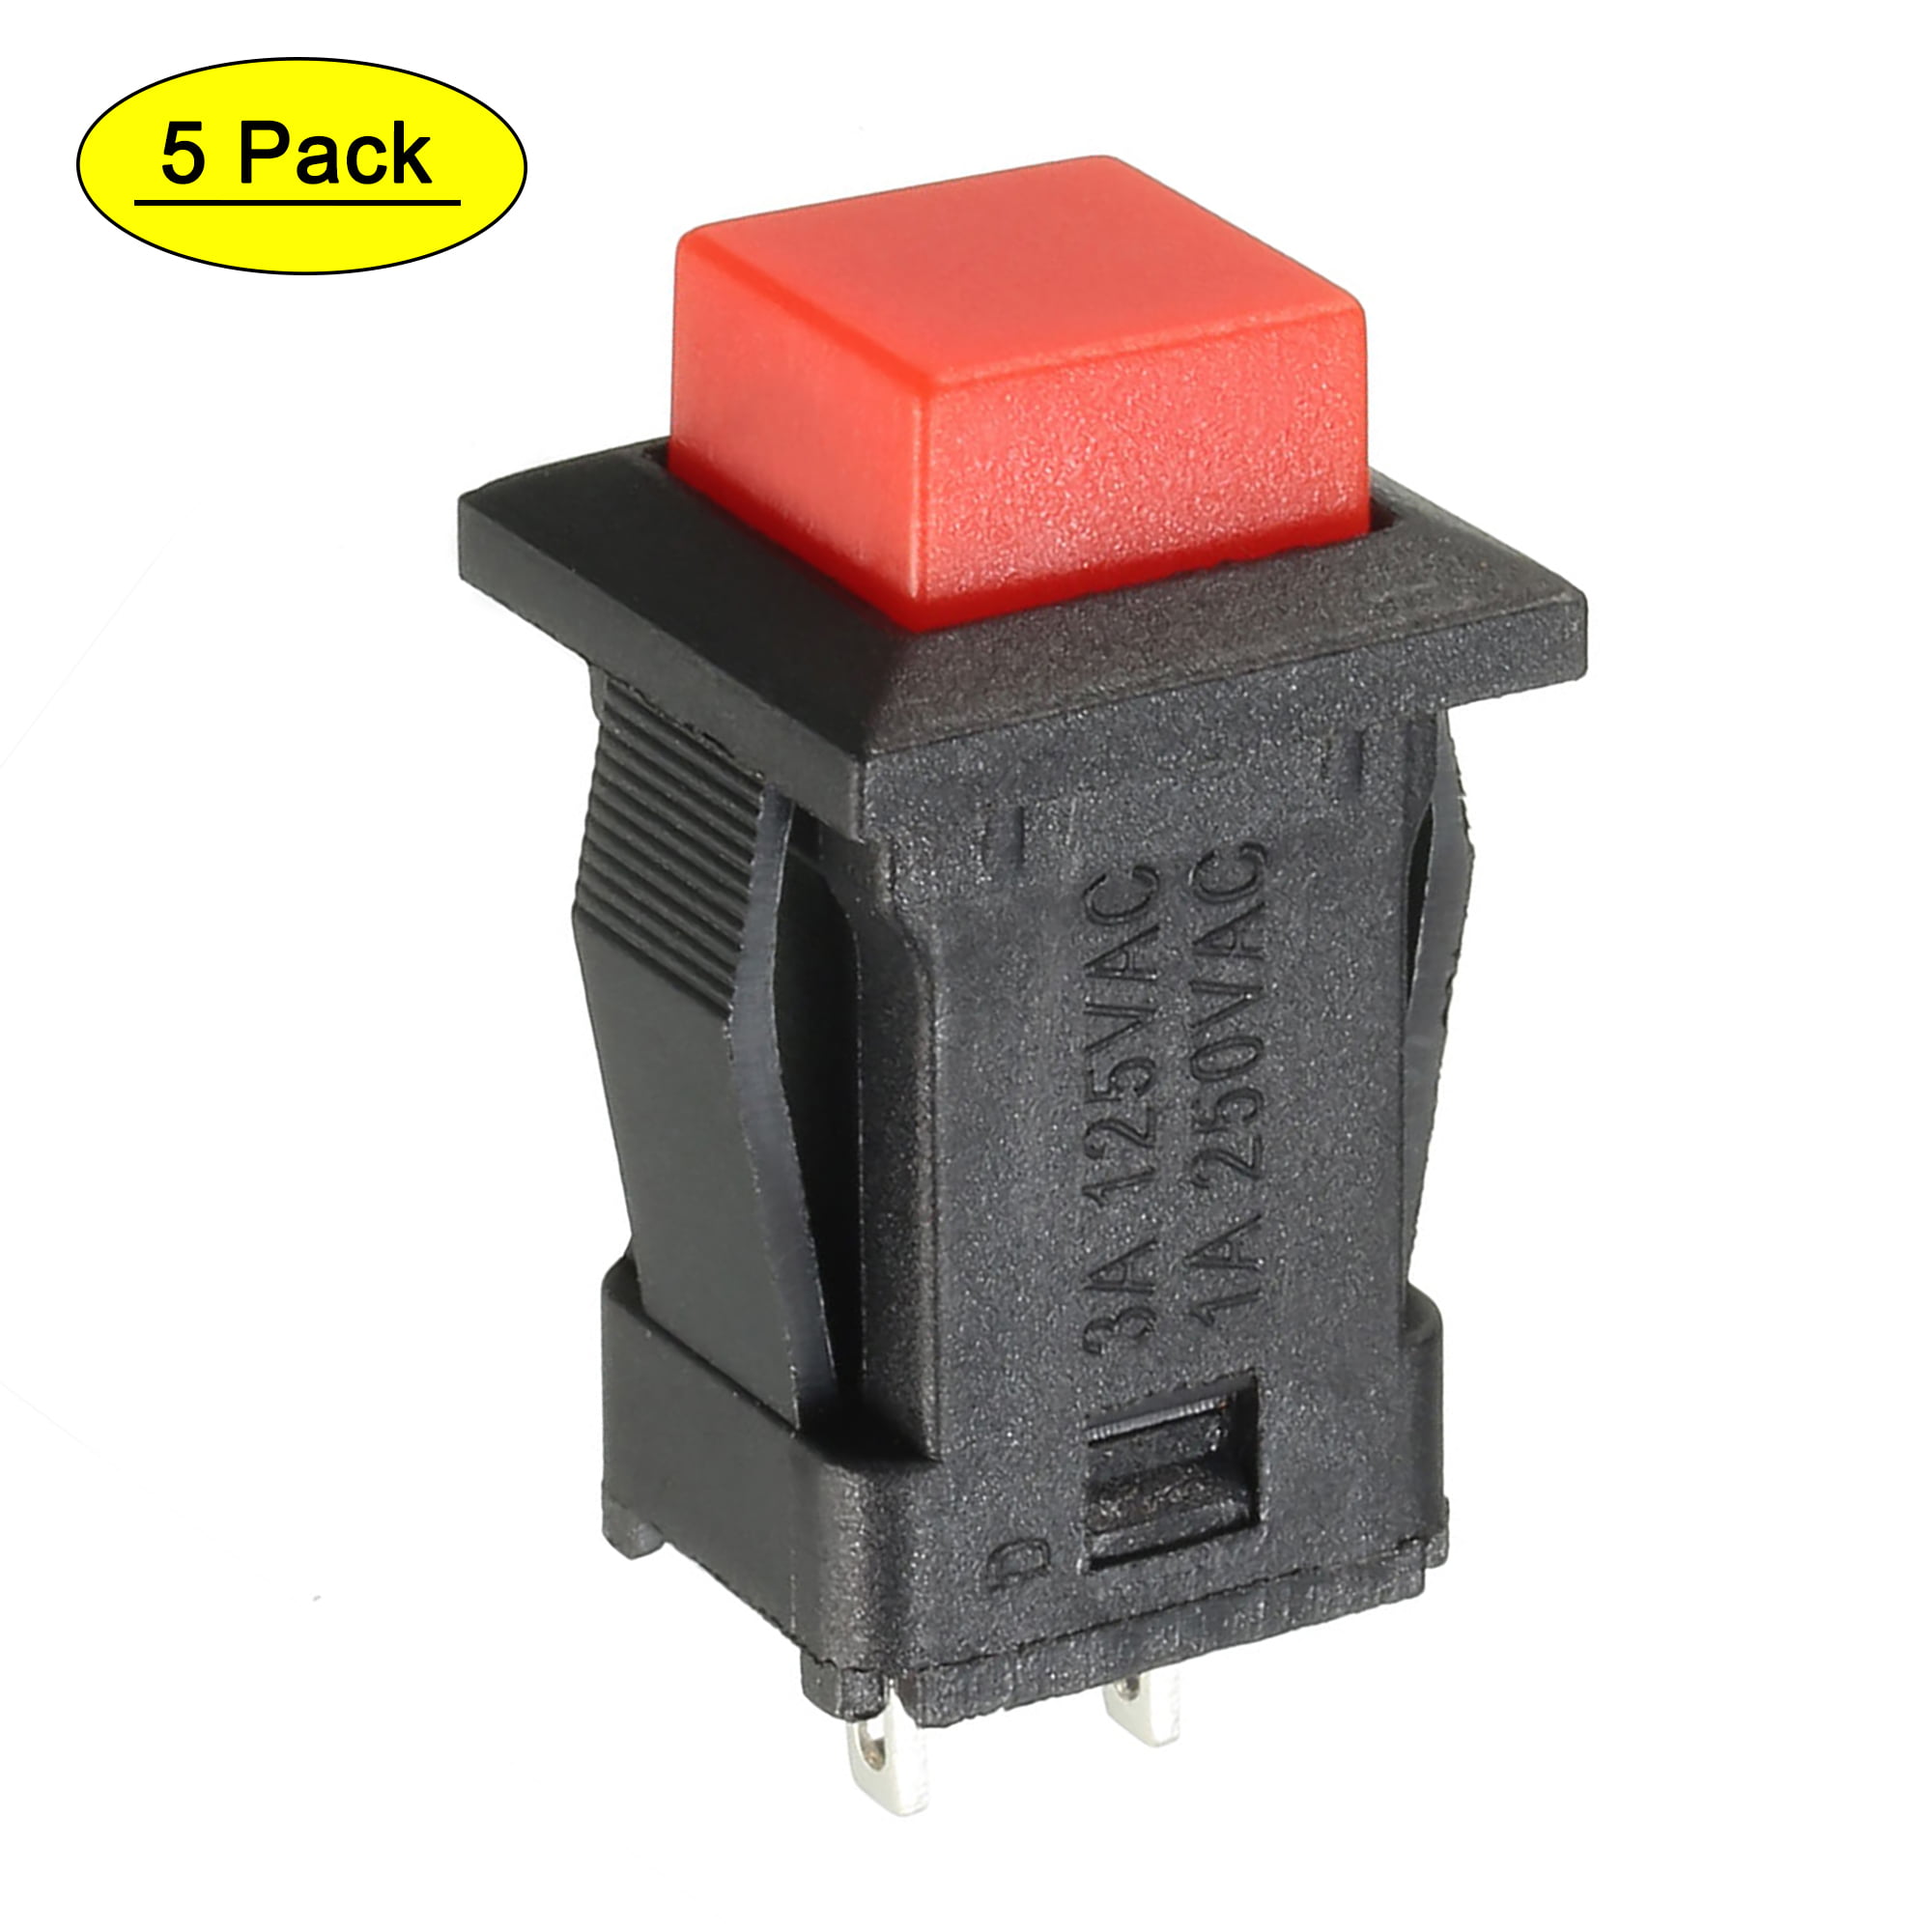 / Uxcell a12062600ux0300 Uxcell Square Head Latching Tactile Push Button Switches Dragonmarts Co Ltd